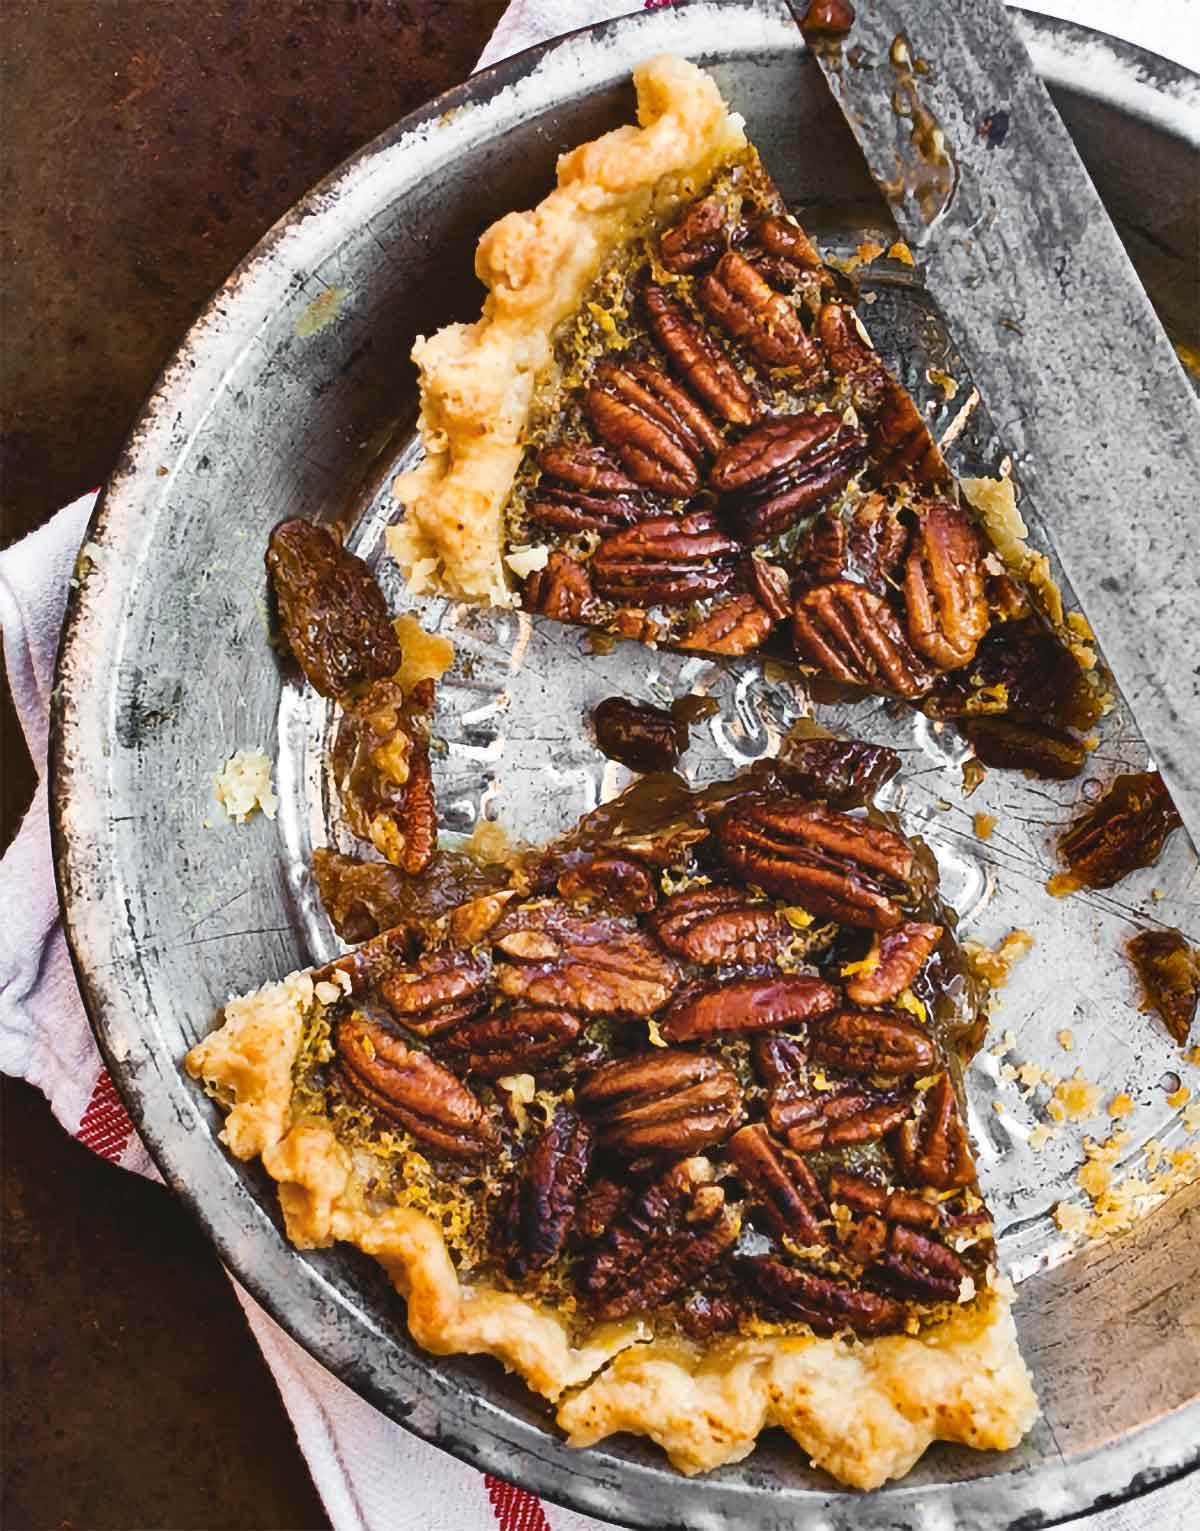 Spiced maple pecan pie, with only two pieces remaining, in a metal pie plate on a kitchen towel.